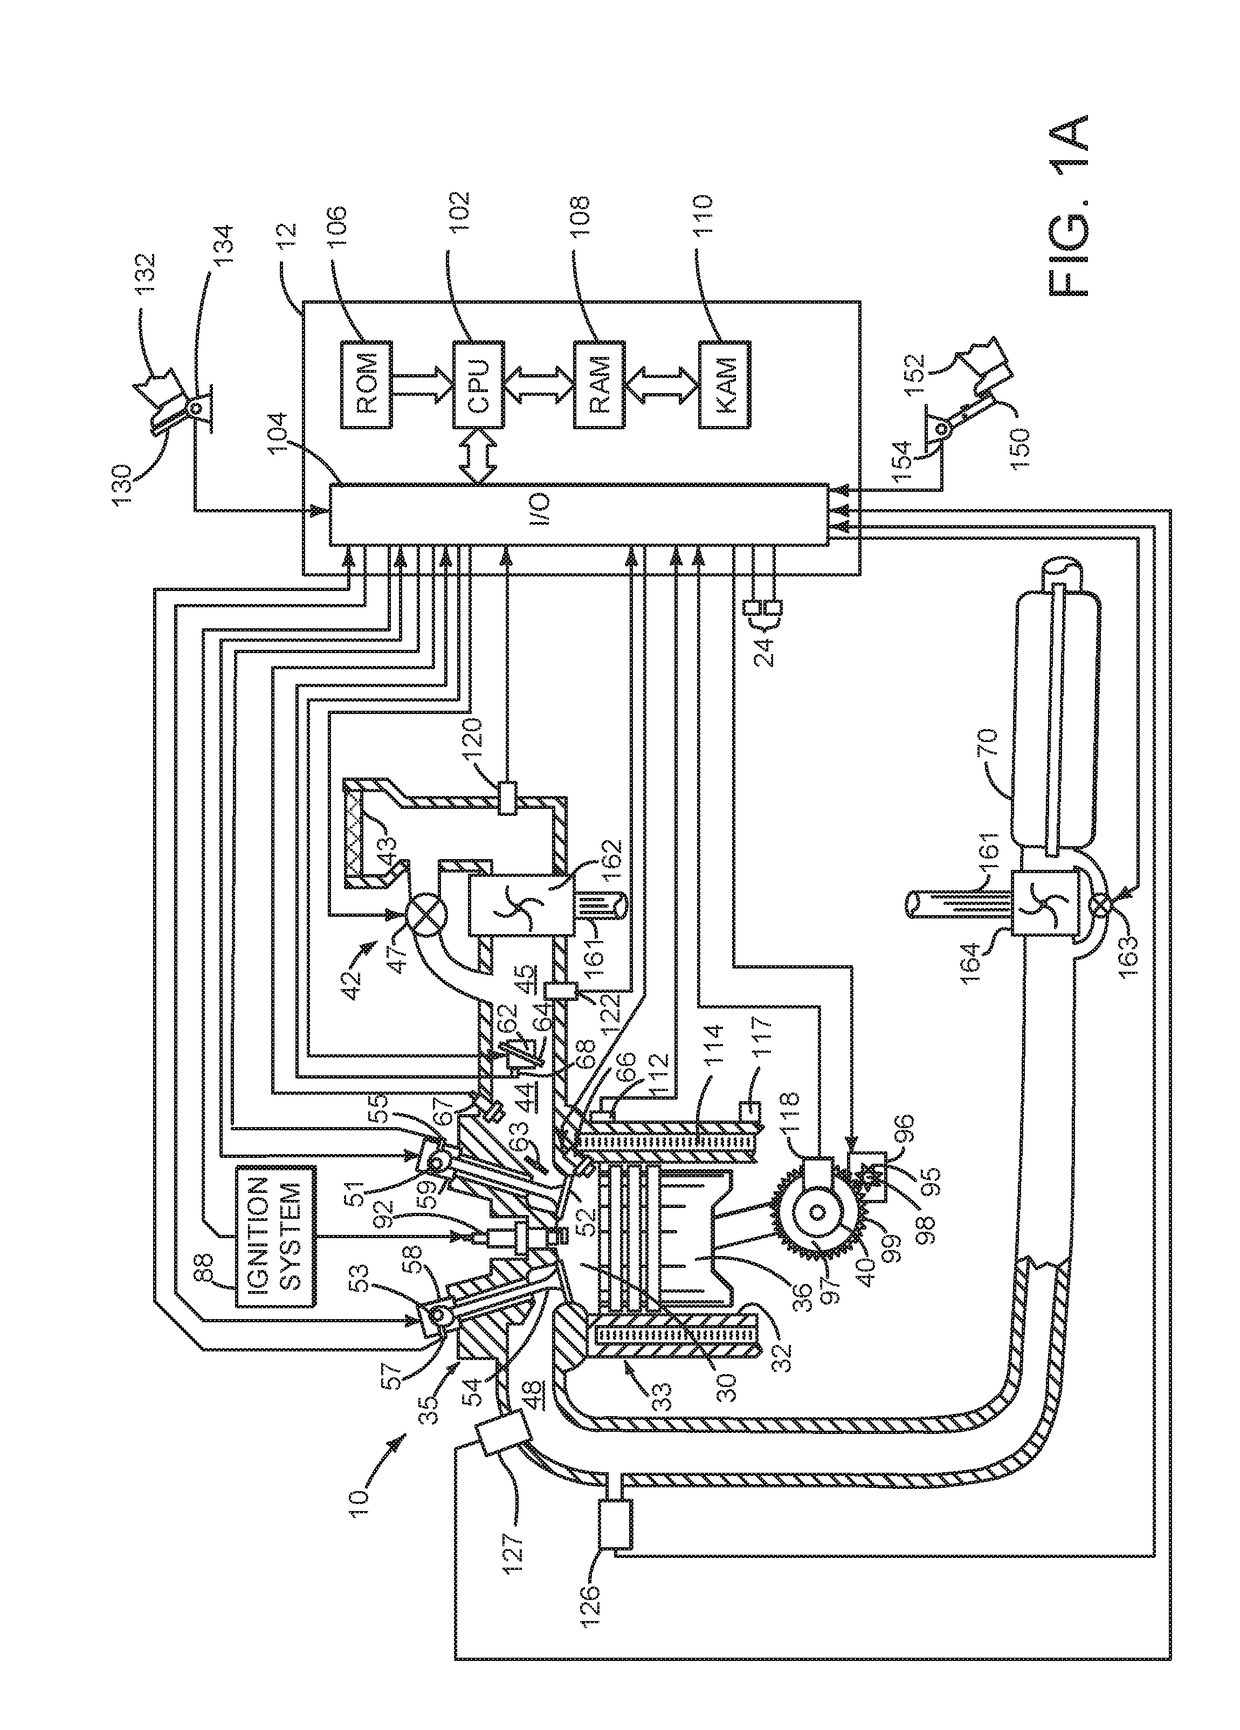 System and method for operating an engine oil pump